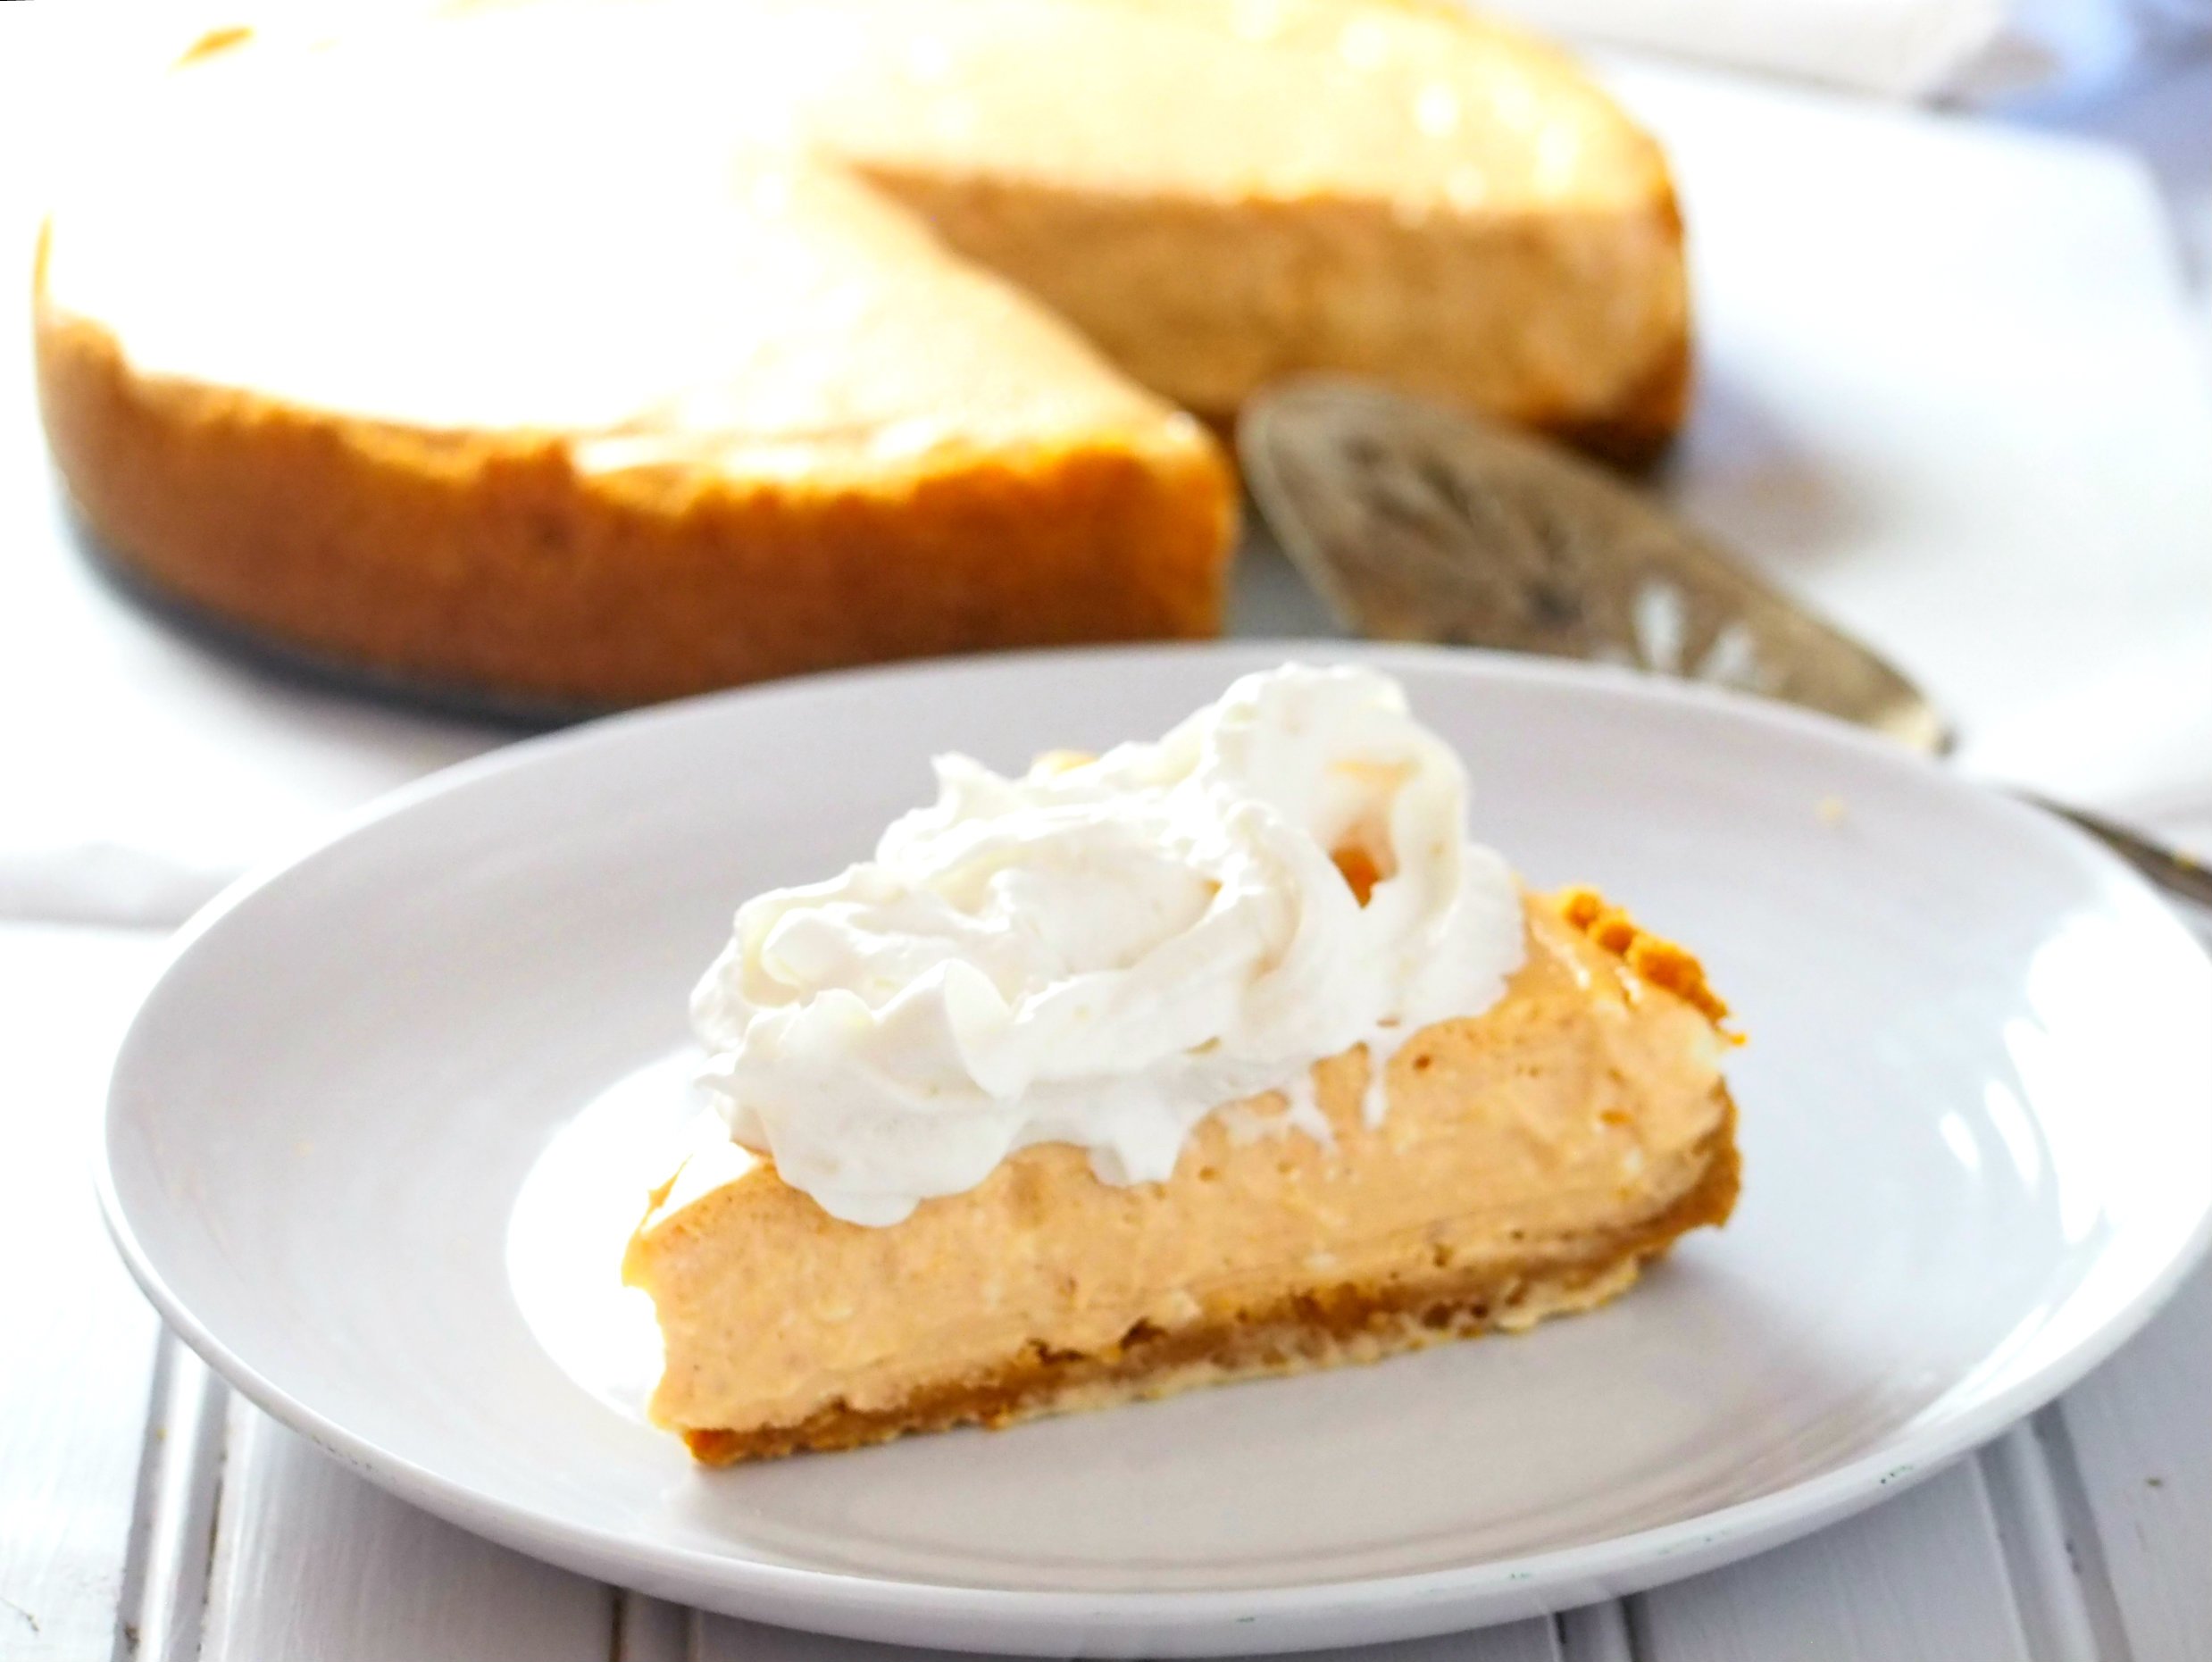 This Pumpkin Cheesecake is a simple recipe that produces a lightly indulgent cheesecake. It has just the right amount of pumpkin flavor that blends beautifully with the rich cream cheese.